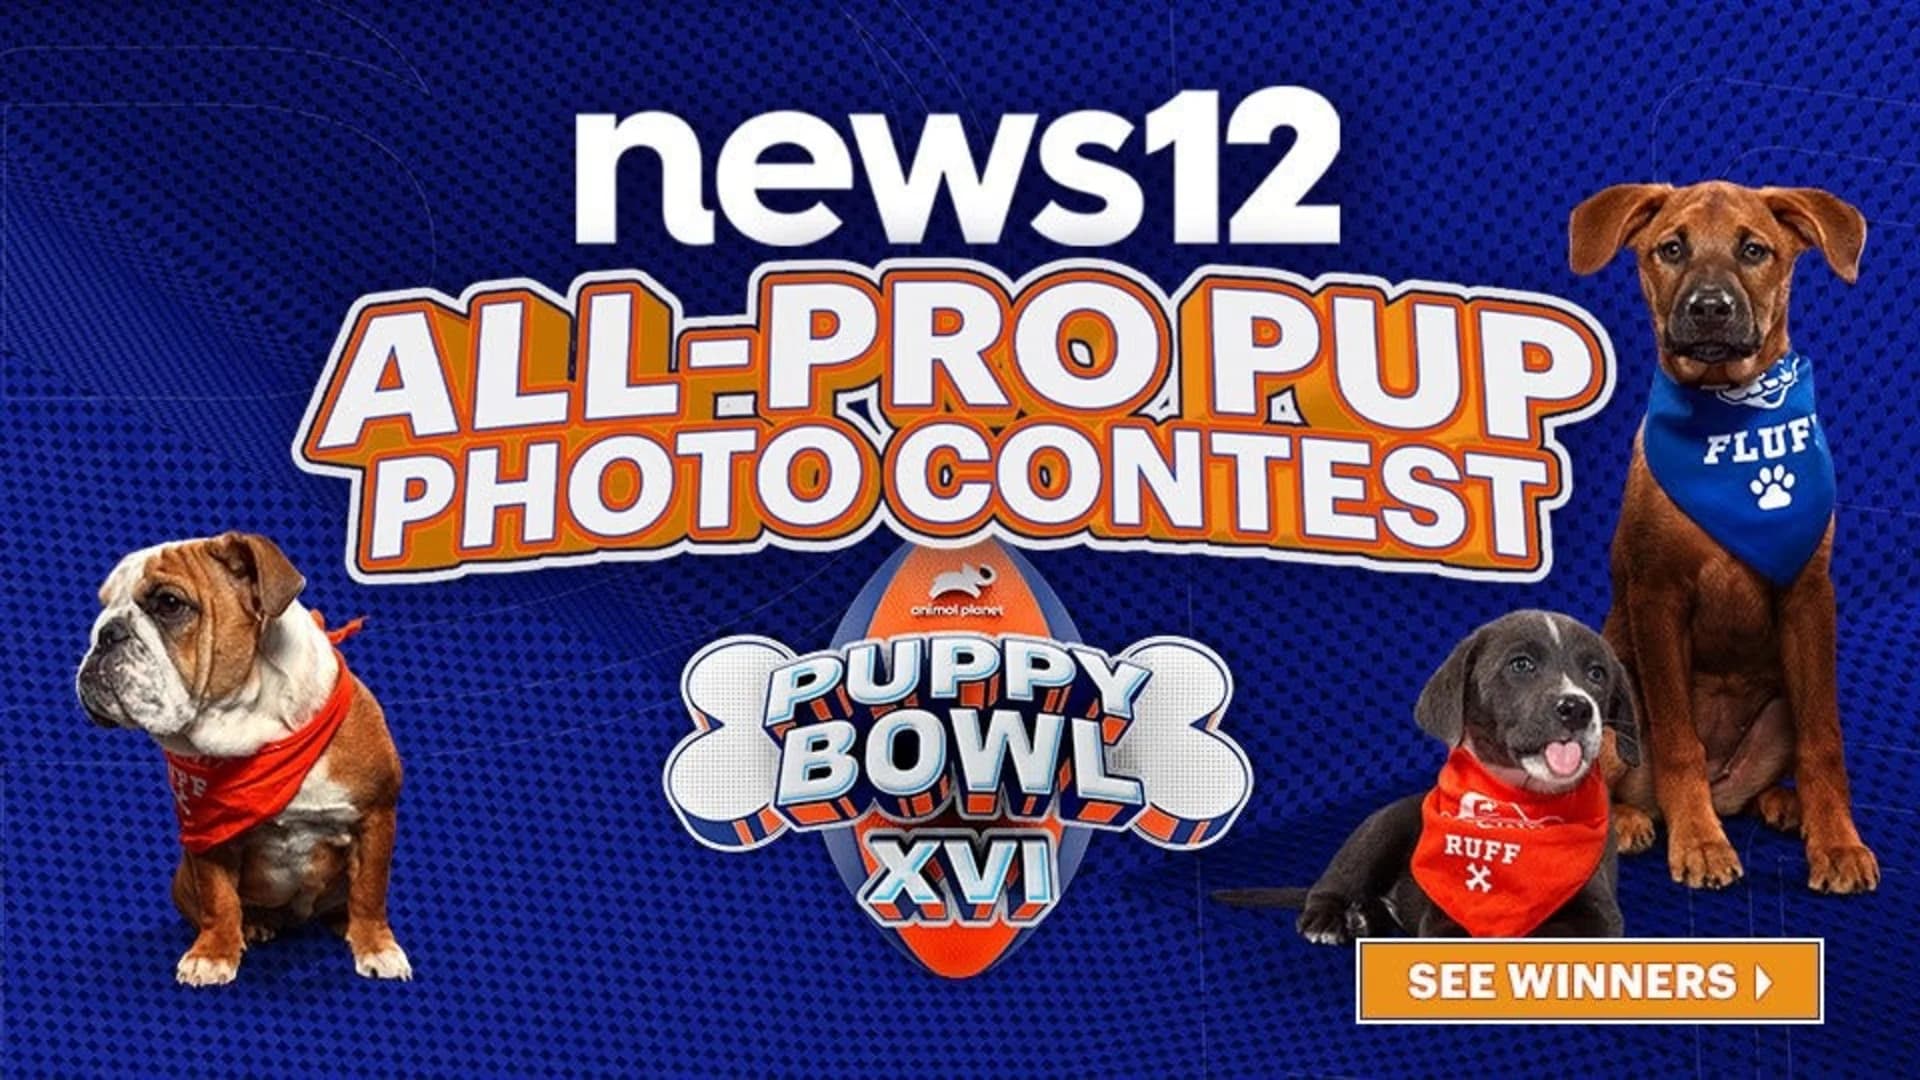 See who won the All-Pro Pup Photo Contest!